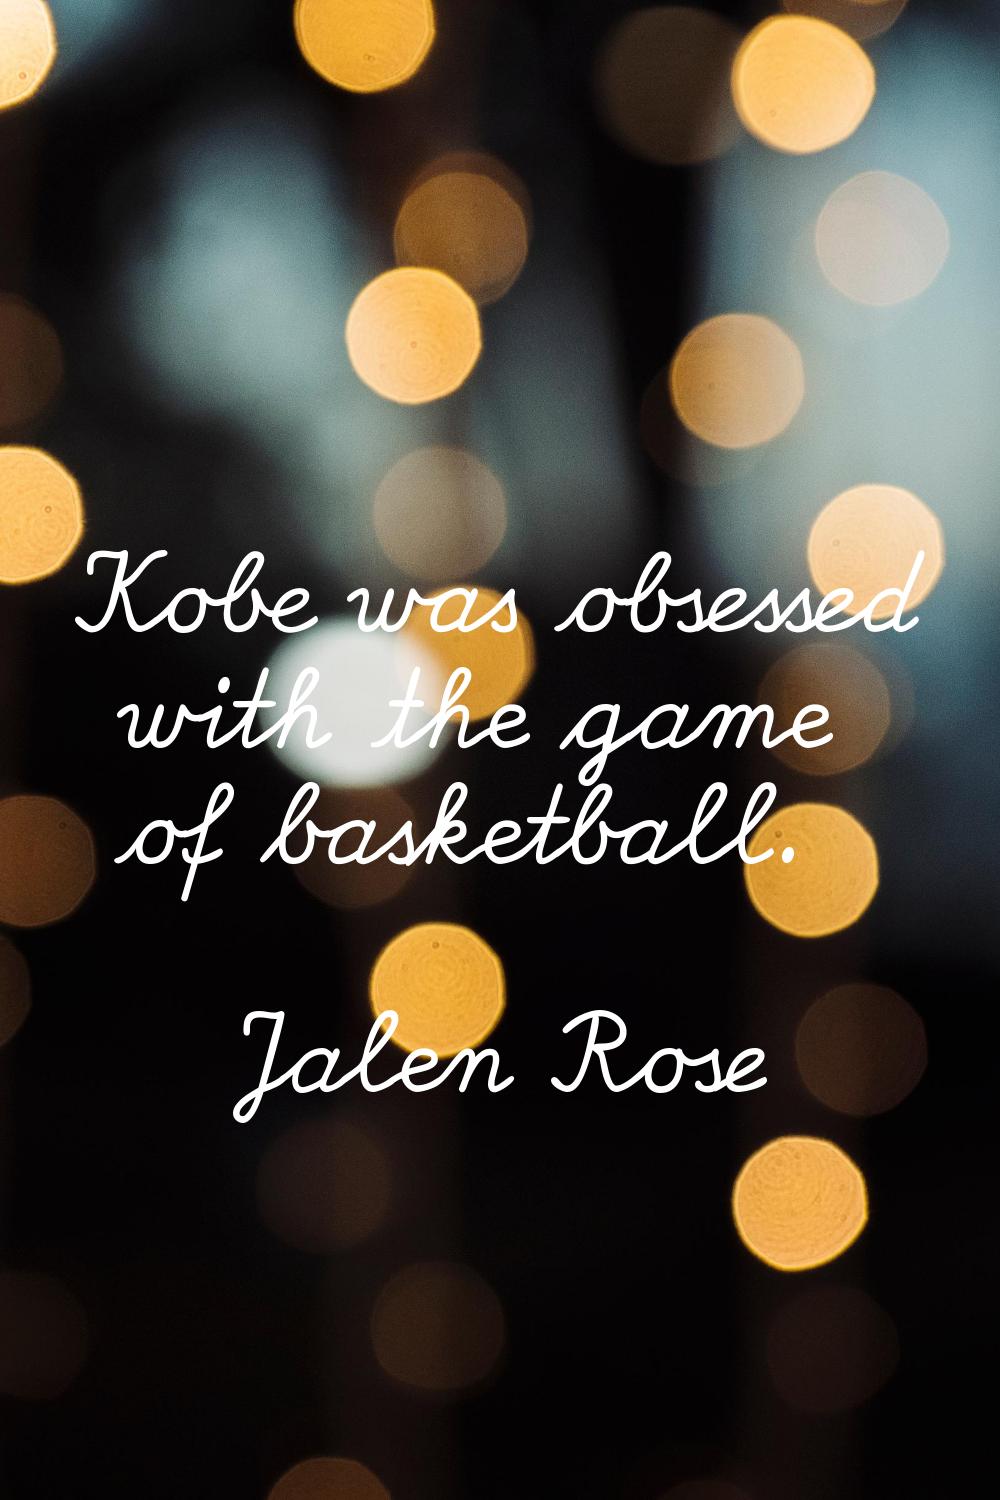 Kobe was obsessed with the game of basketball.